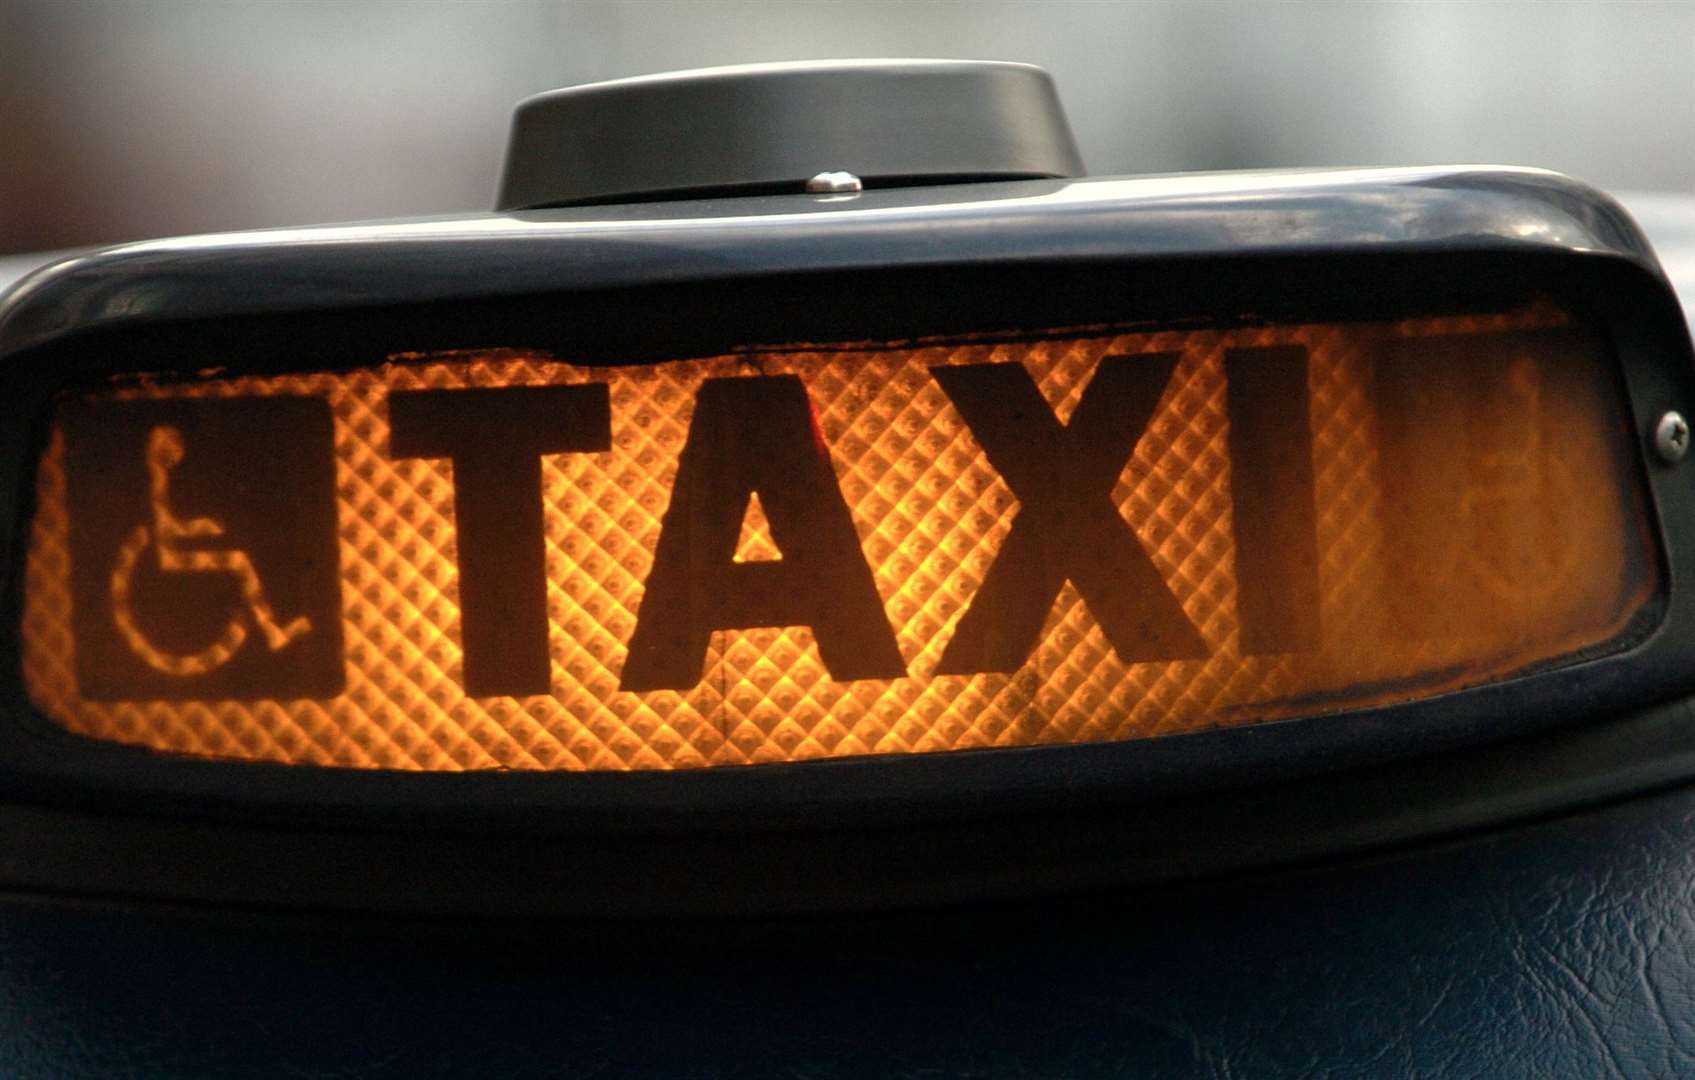 Two taxi drivers were fined for refusing a ride to a partially sighted person and their support dog